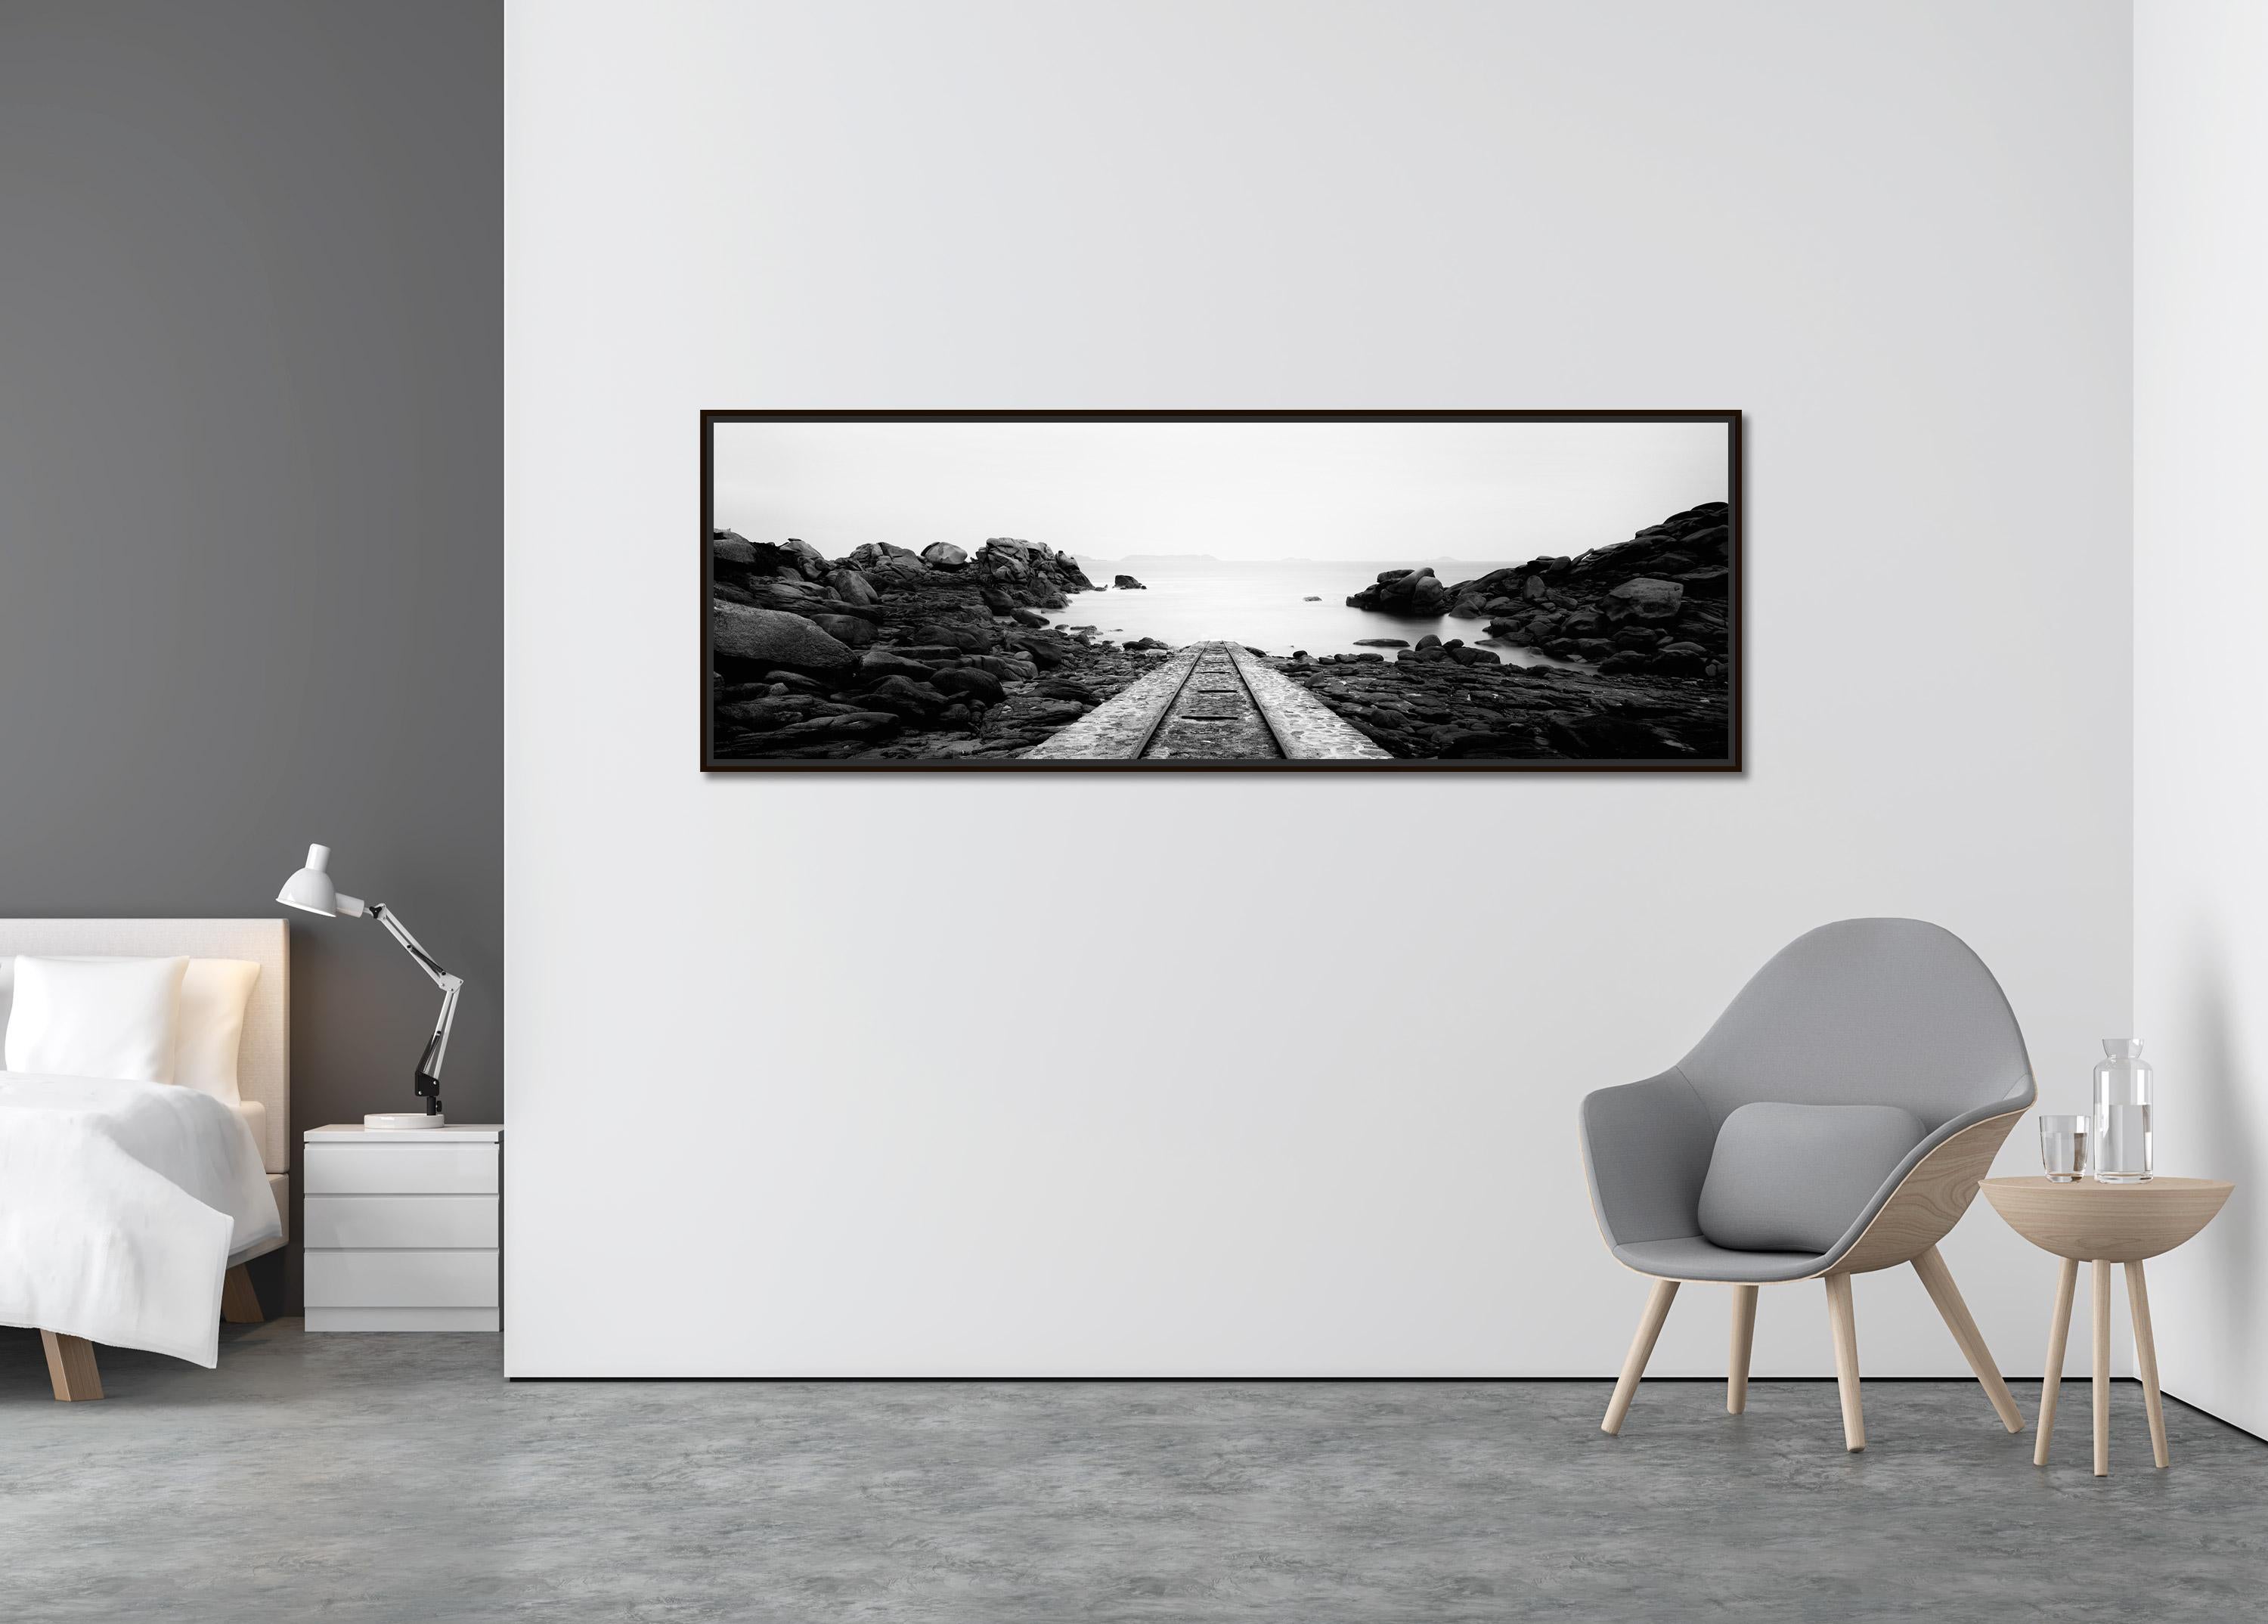 Into the Ocean railroad Atlantic bay France black white landscape photography - Contemporary Photograph by Gerald Berghammer